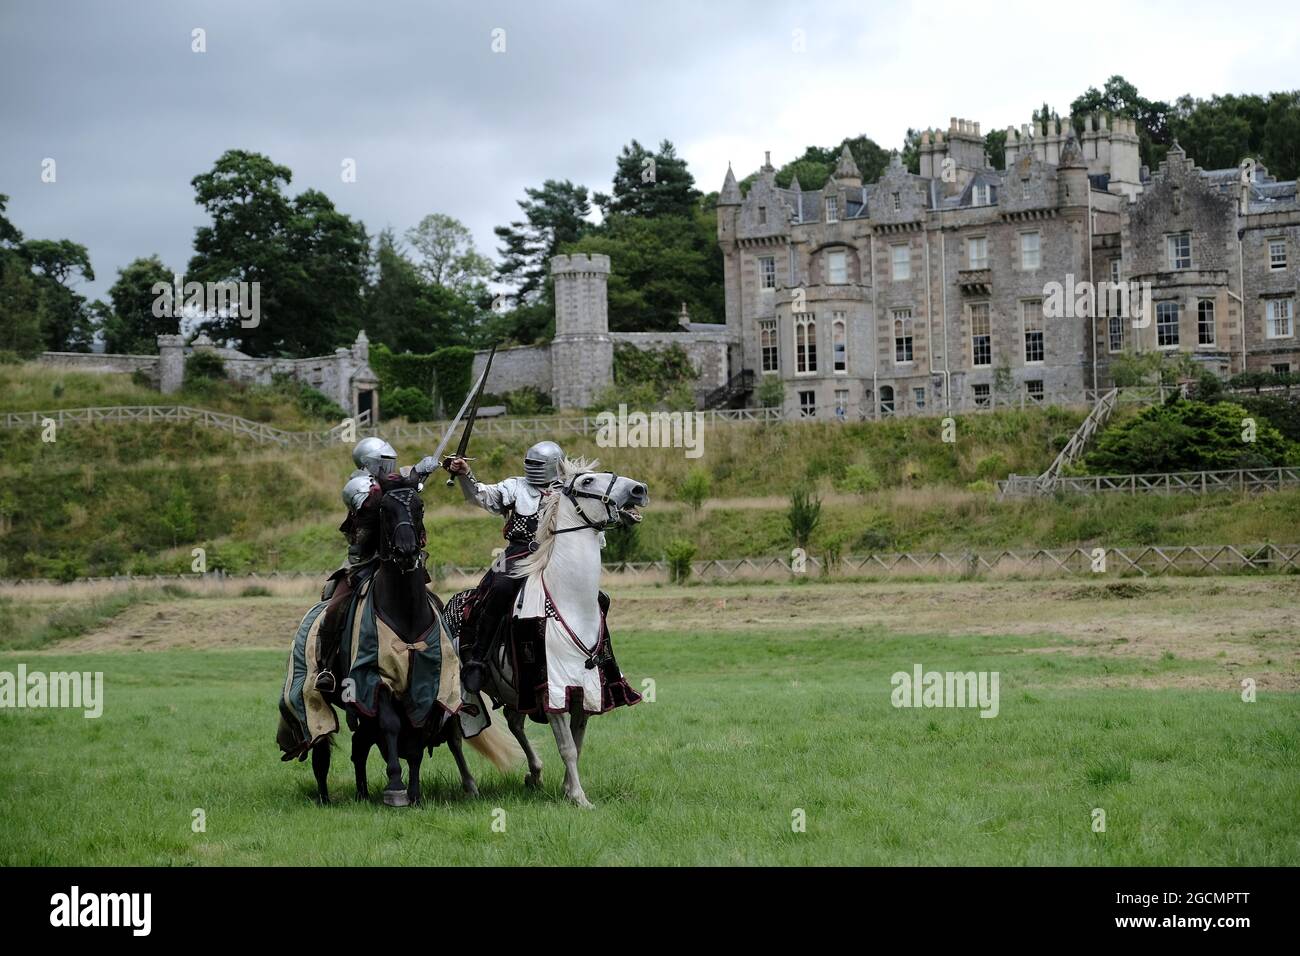 Melrose Uk 9 August 21 Photocall For Scottfest 21 At Abbotsford House Melrose Jake Martin On Merly R And Cody Duffy On Champion L From Les Amis Will Demonstrate Jousting Knights Scotlandos